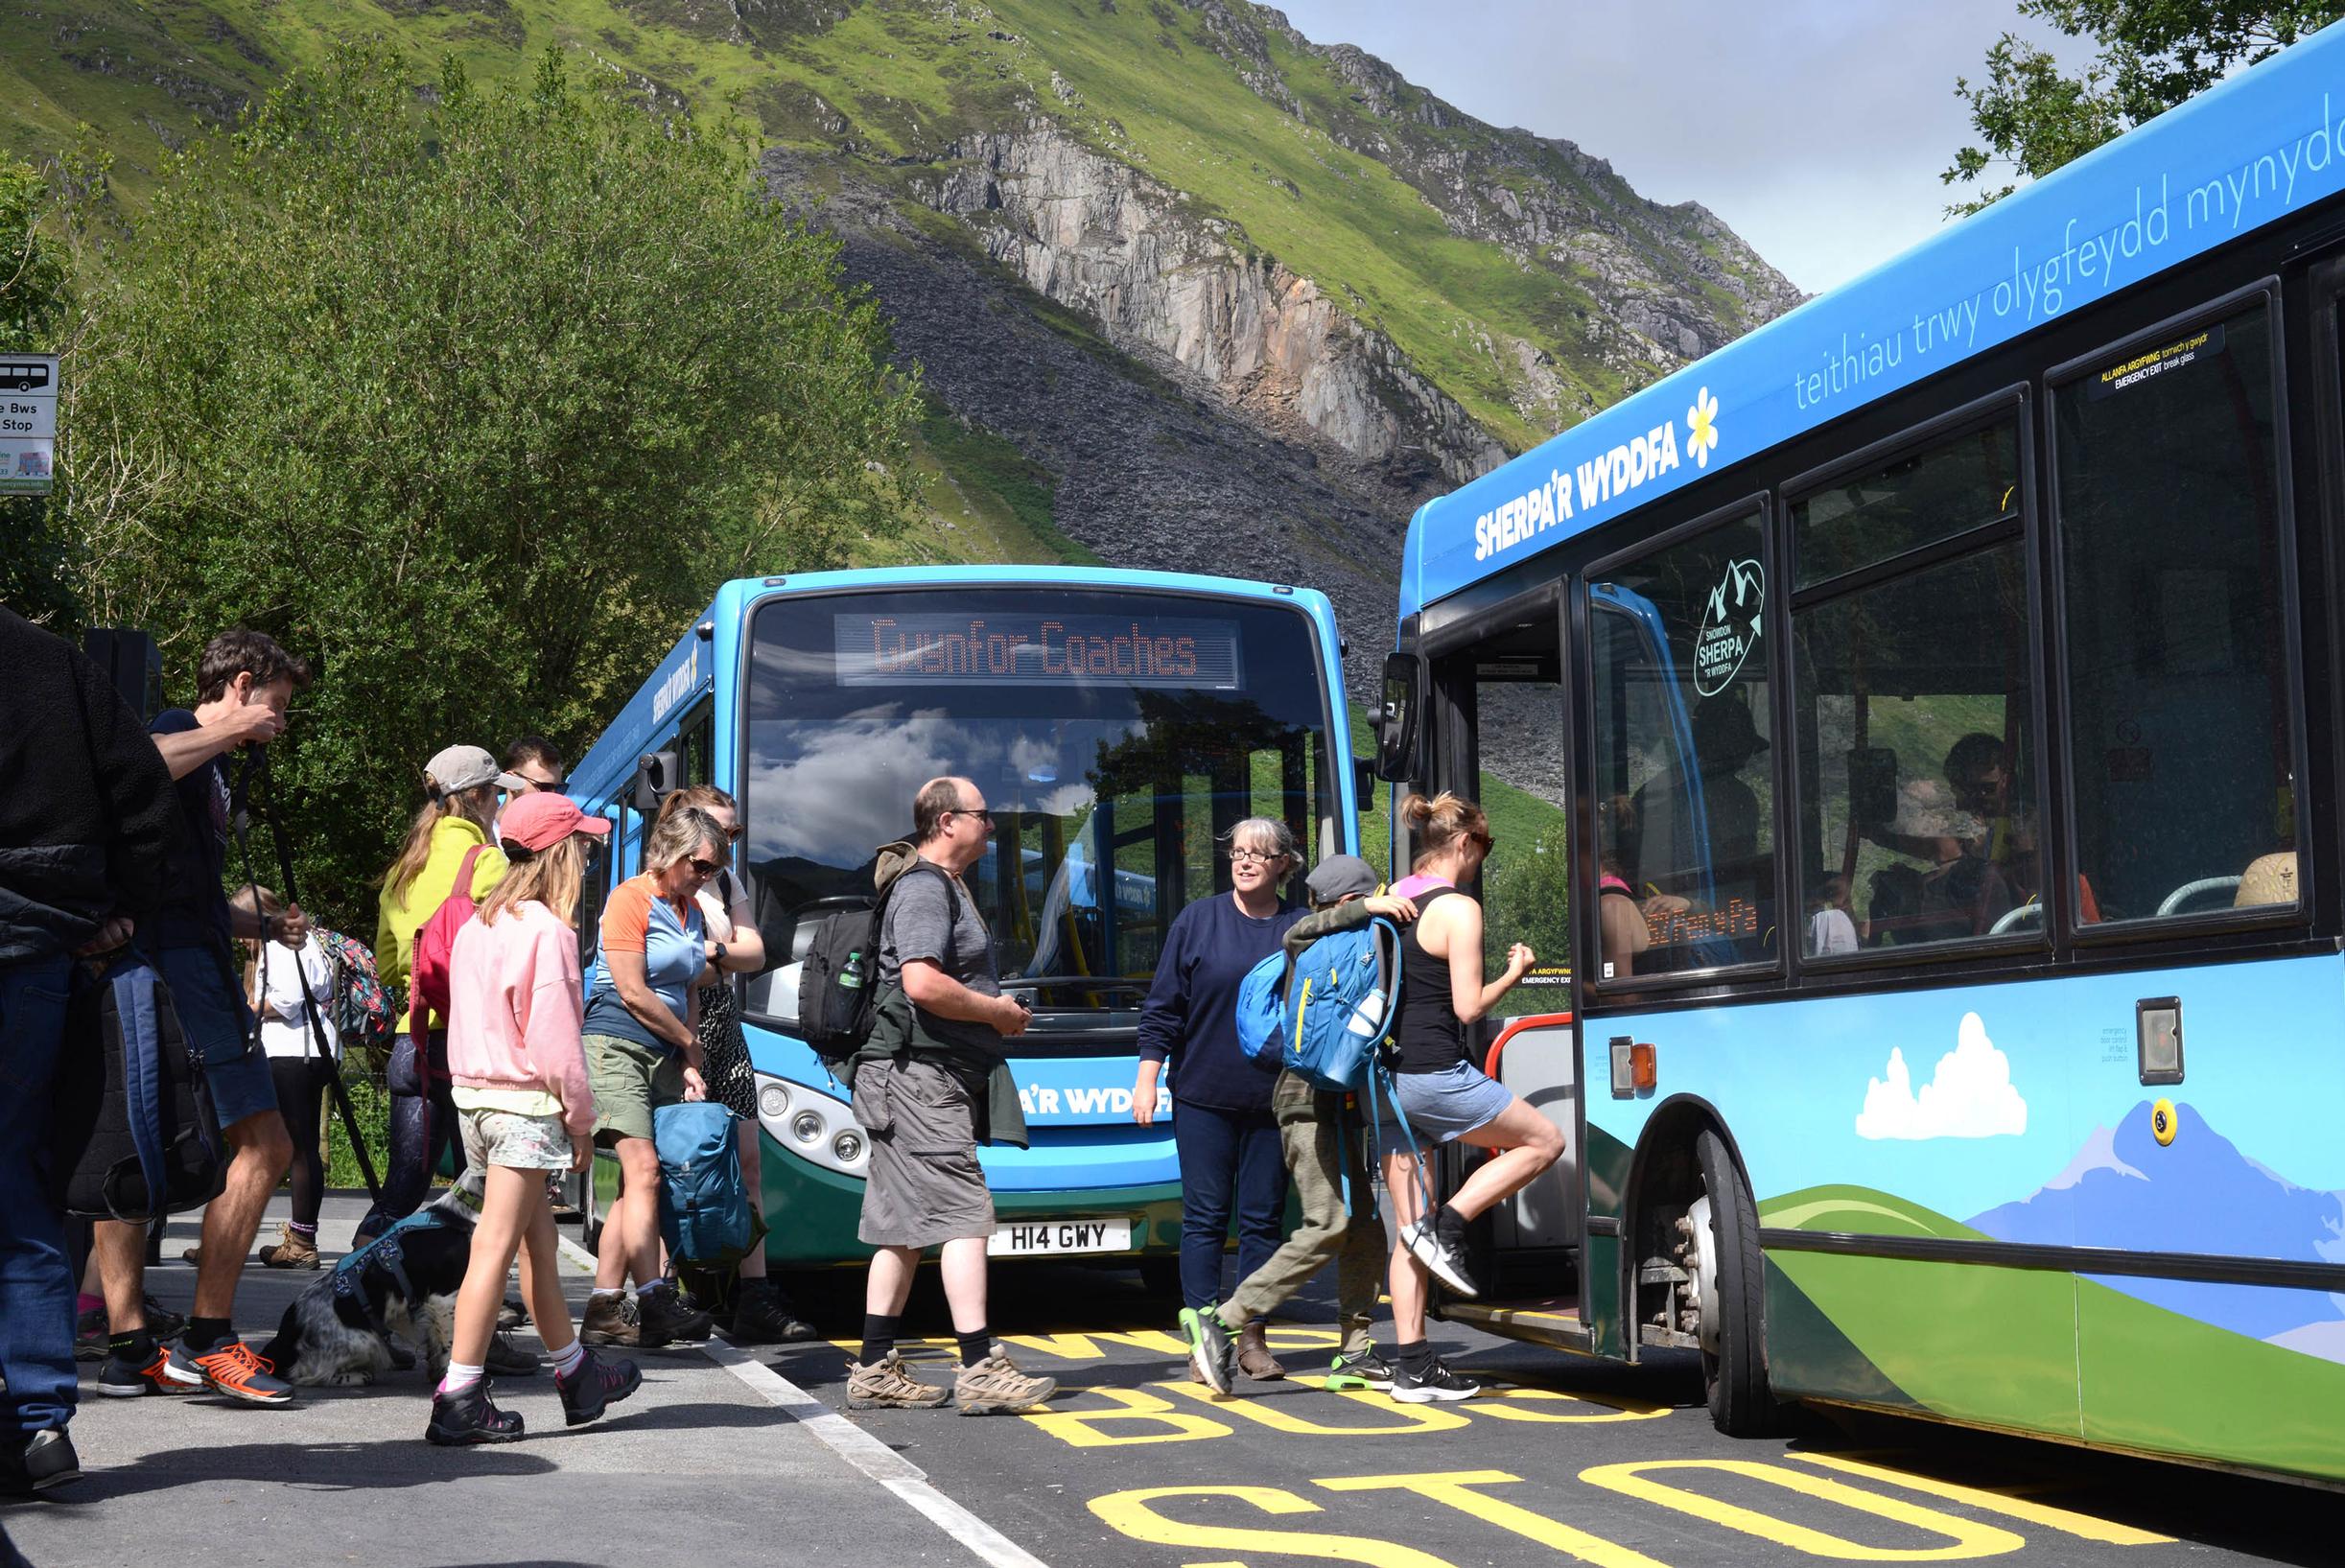 Car demand management and the improved Sherpa’r Wyddfa network helped to boost public transport in Snowdonia last summer.